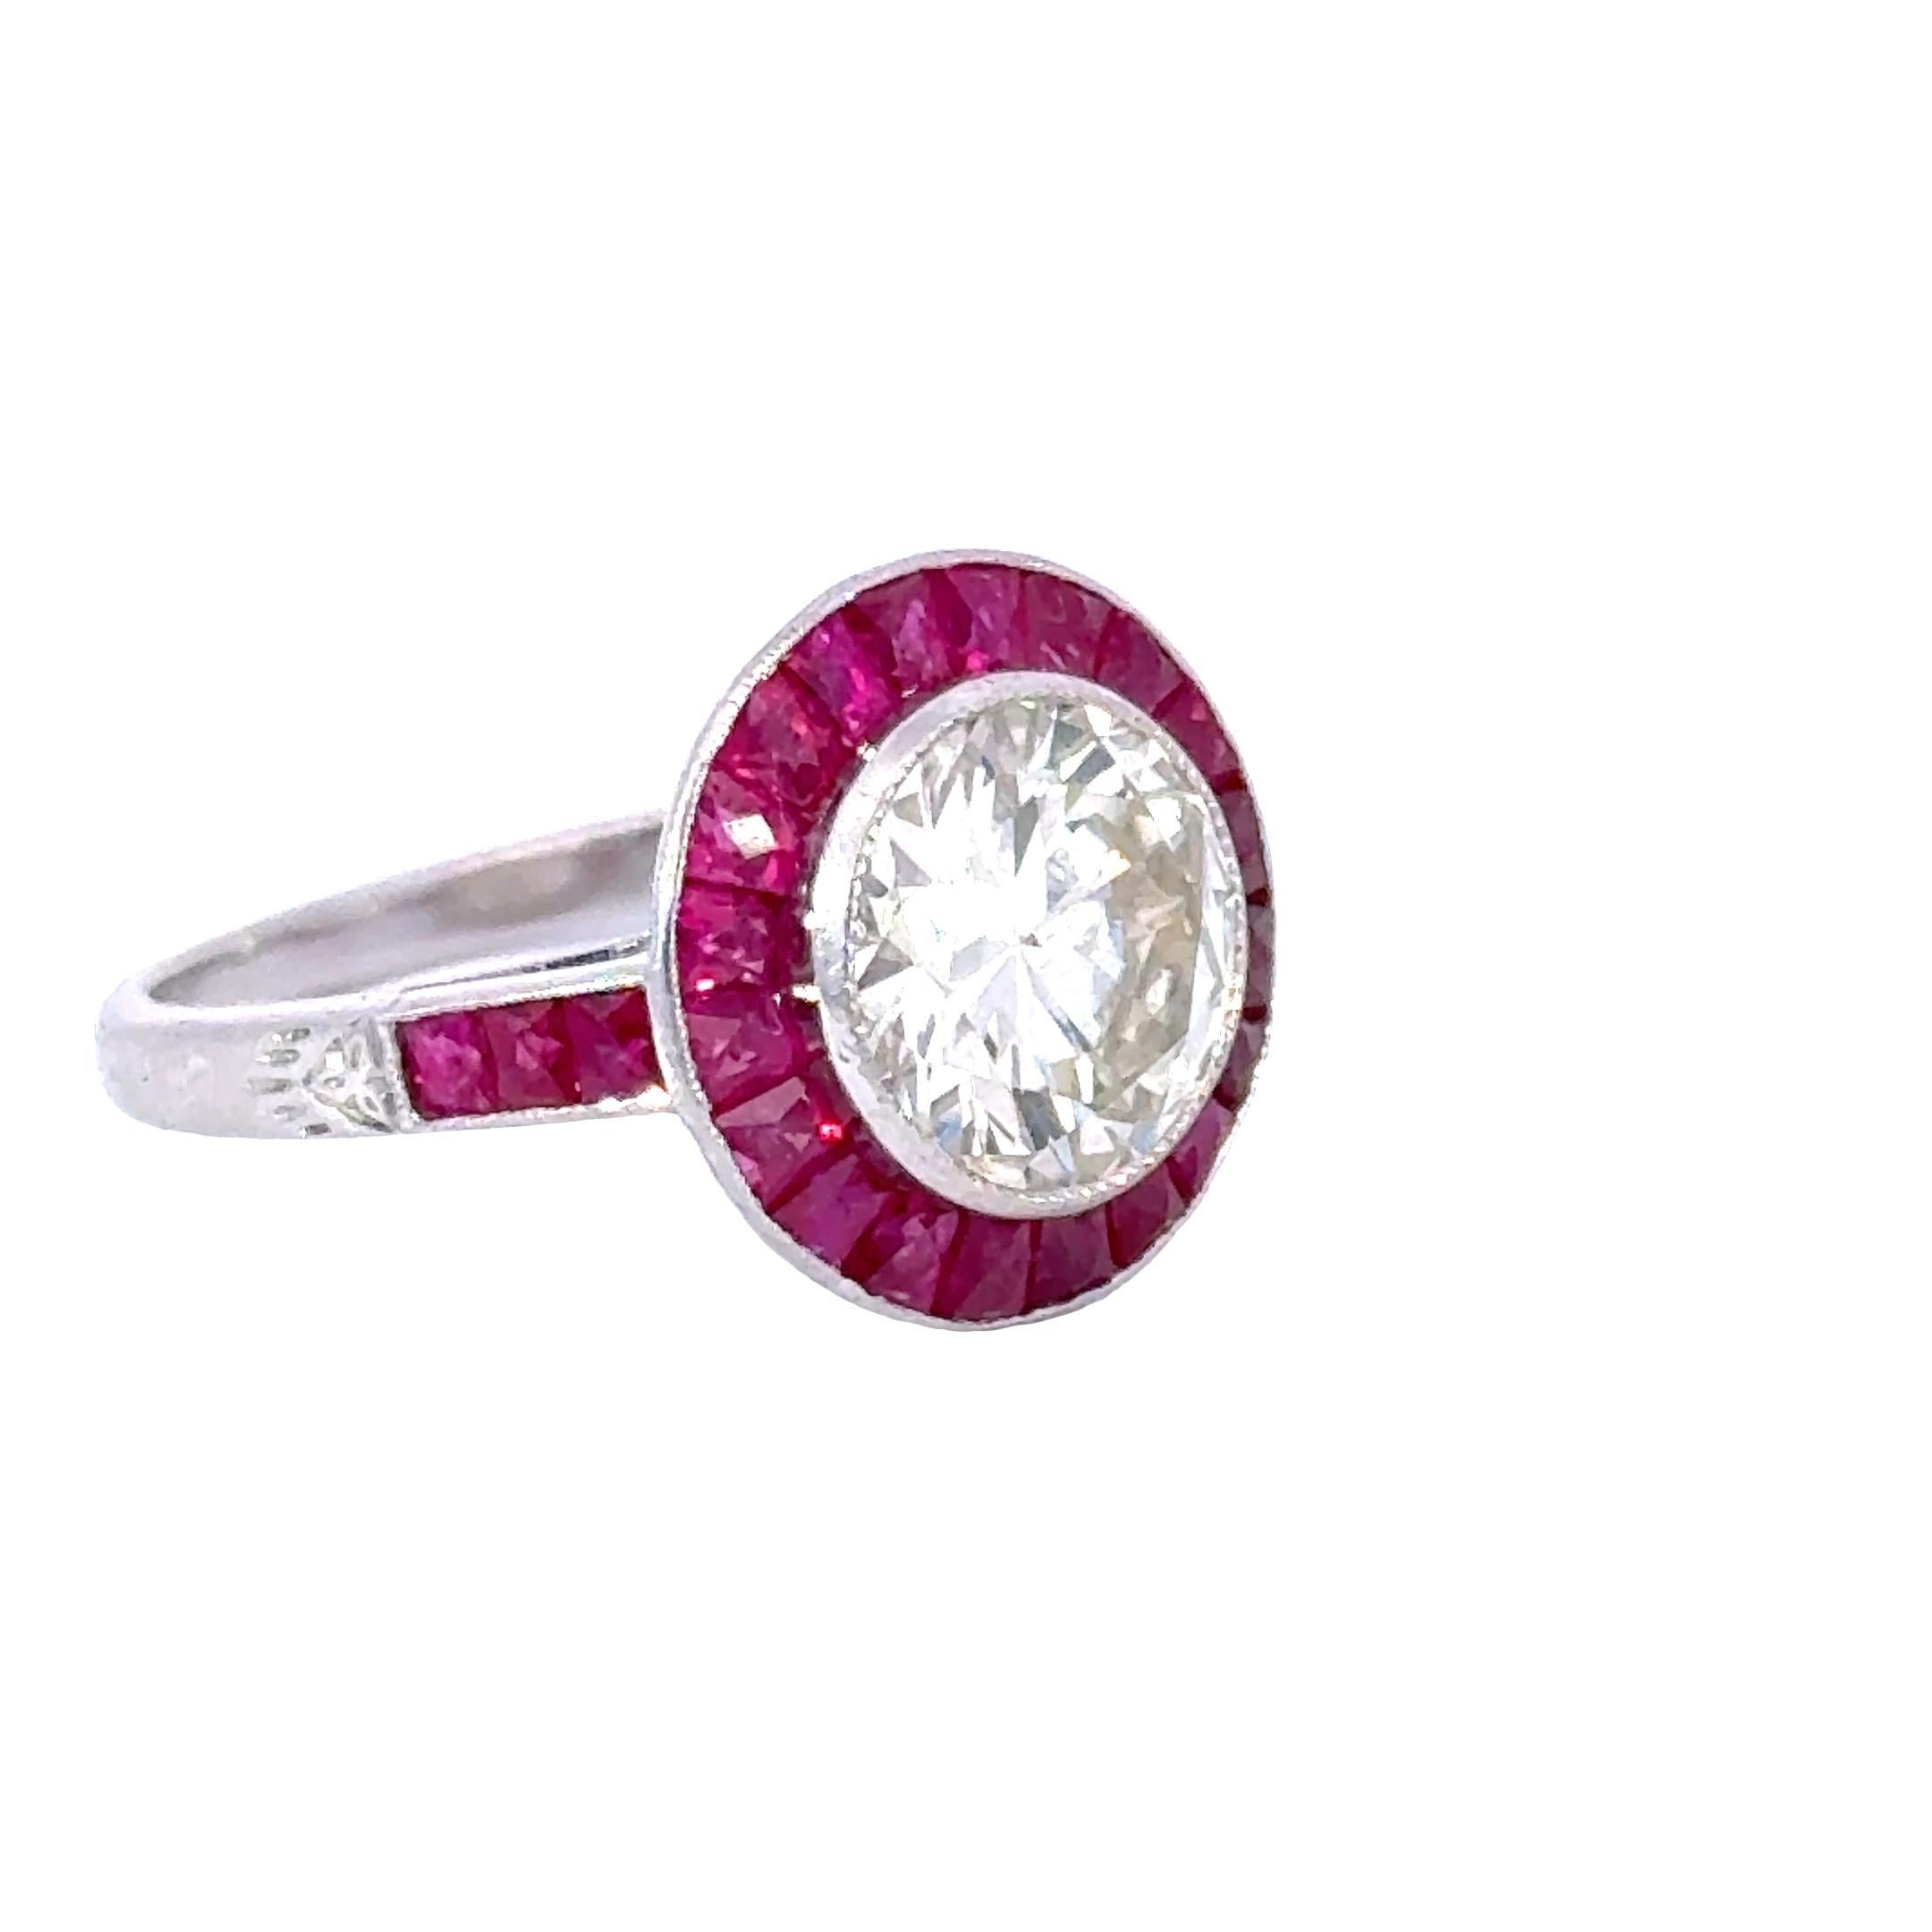 This stunning Diamond, Ruby, Platinum Ring is a true masterpiece that exudes elegance and luxury. Crafted with meticulous attention to detail, it captivates with its radiant design and exceptional gemstones.

At the heart of this ring are round